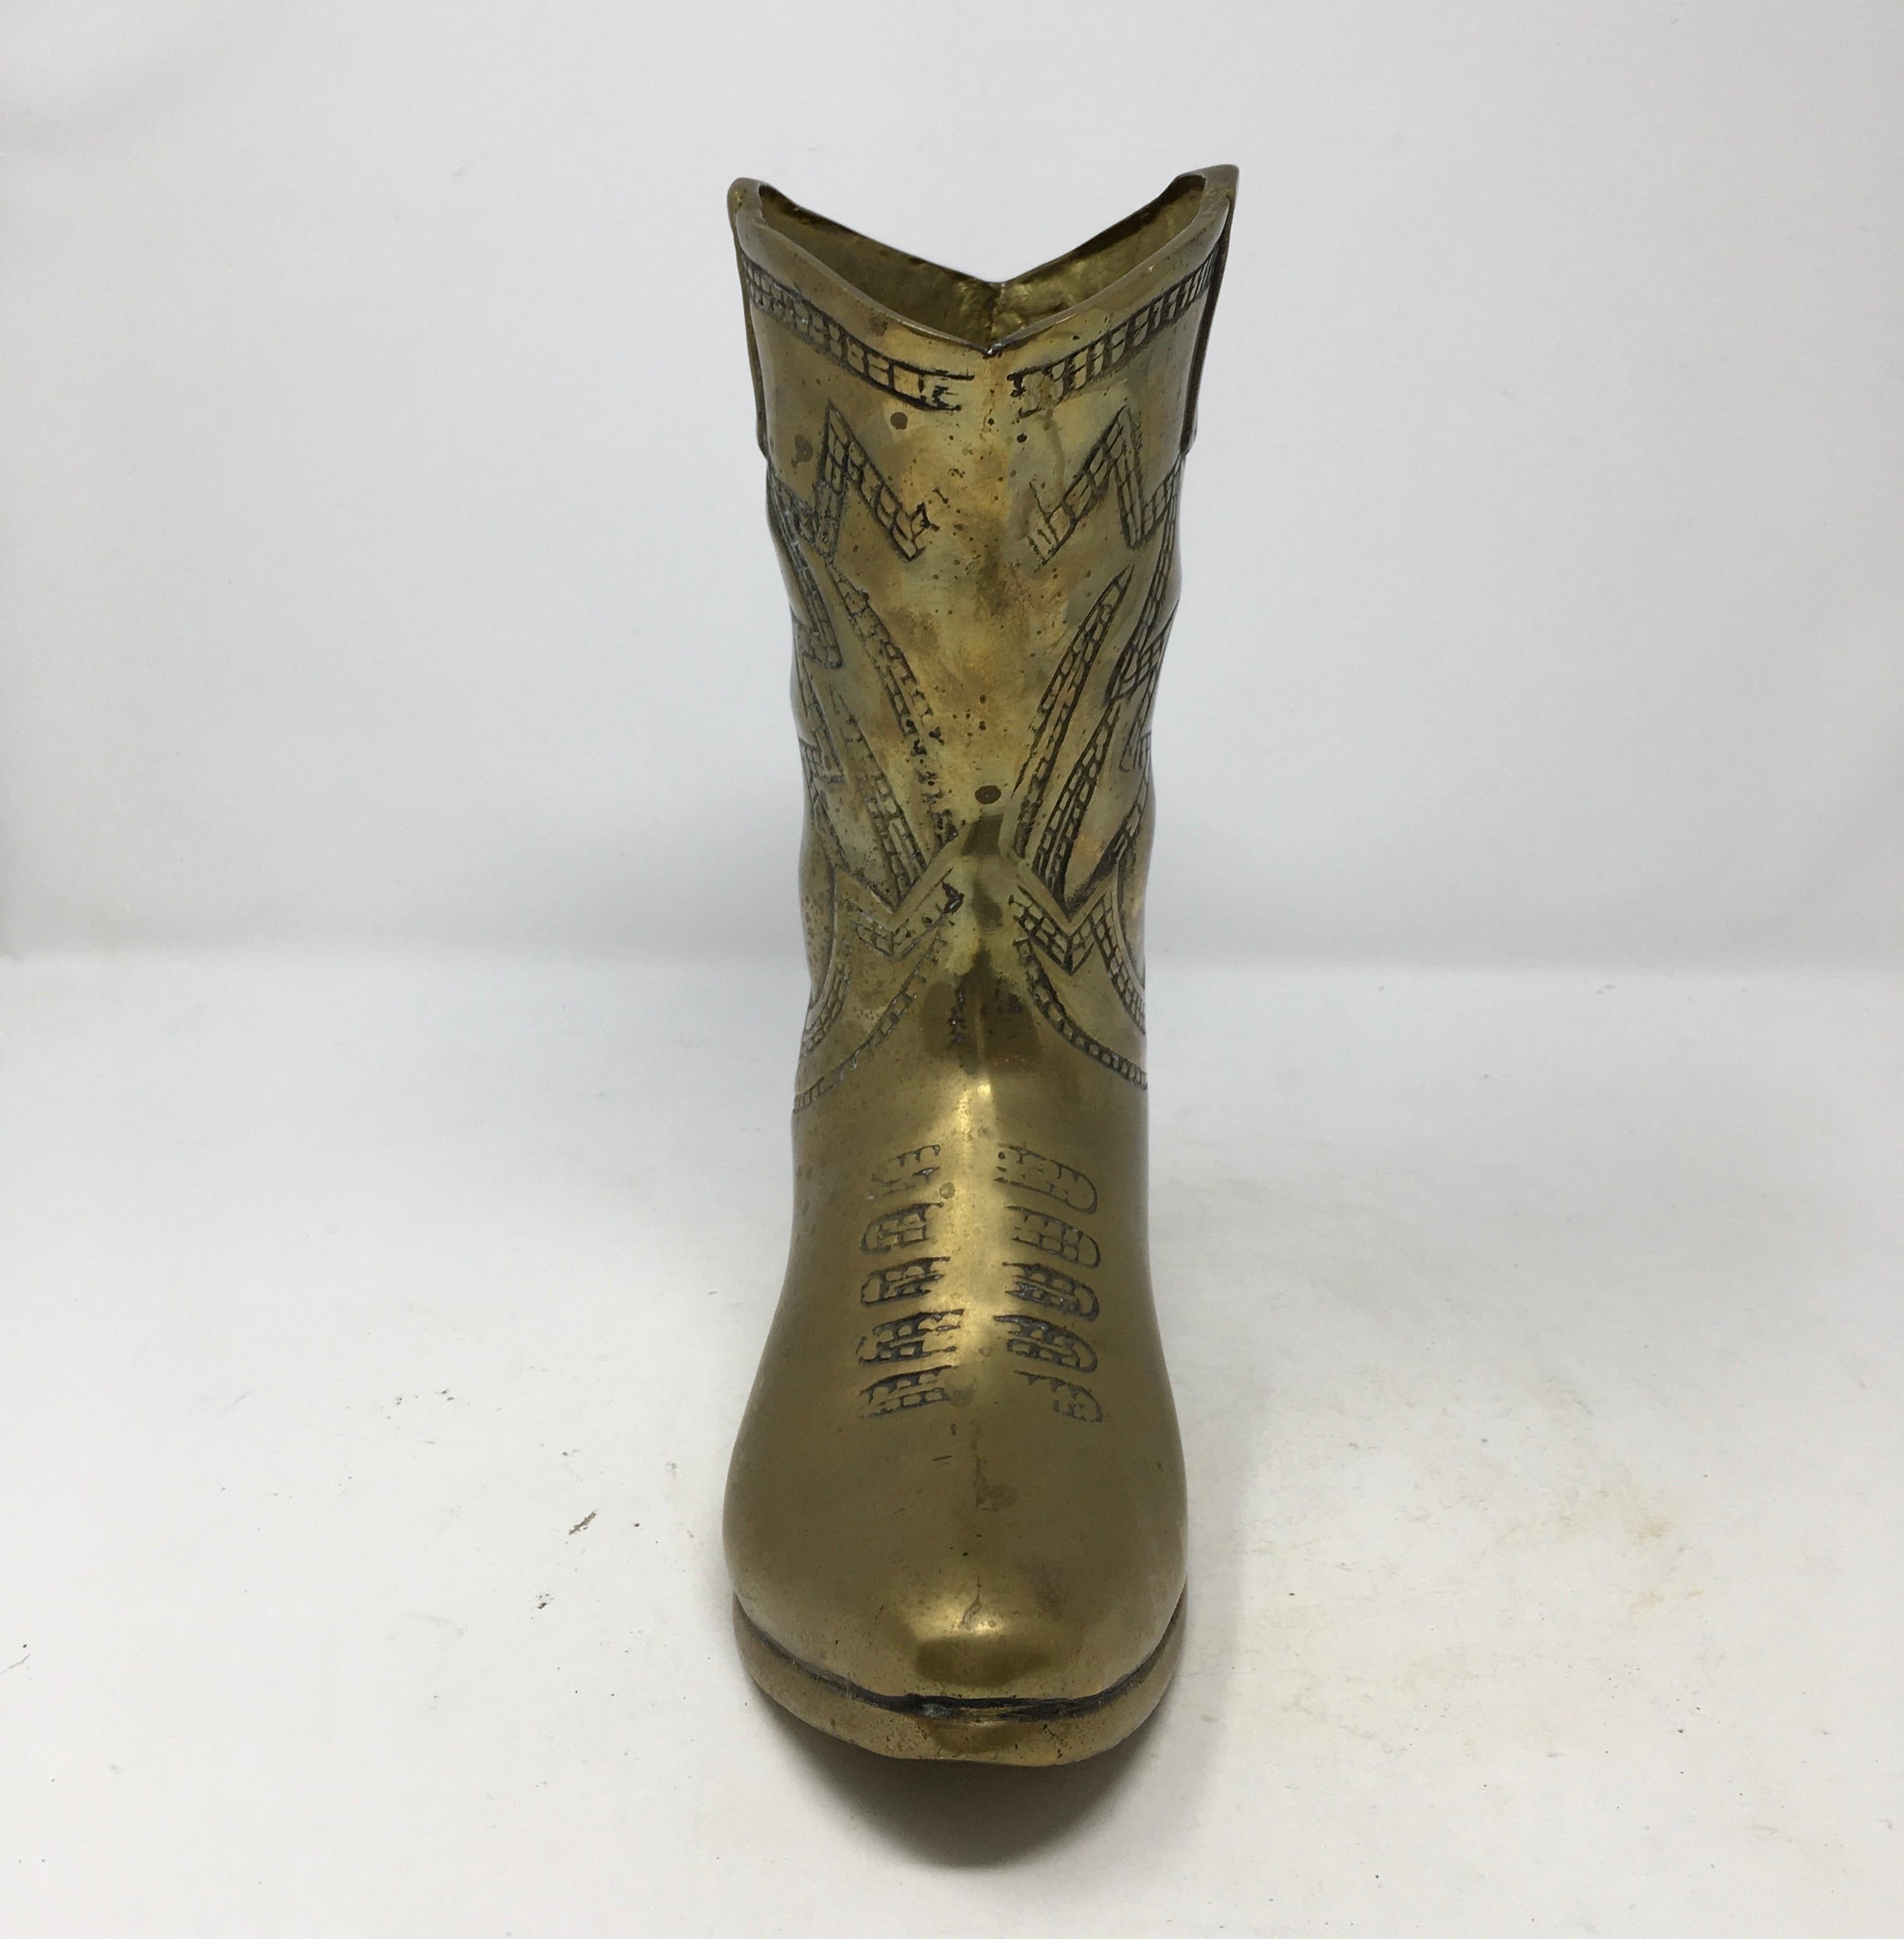 A vintage solid brass western style cowboy boot with a molded design. Nicely detailed, this piece would display well in a home or office.

This piece weighs 4 lbs.